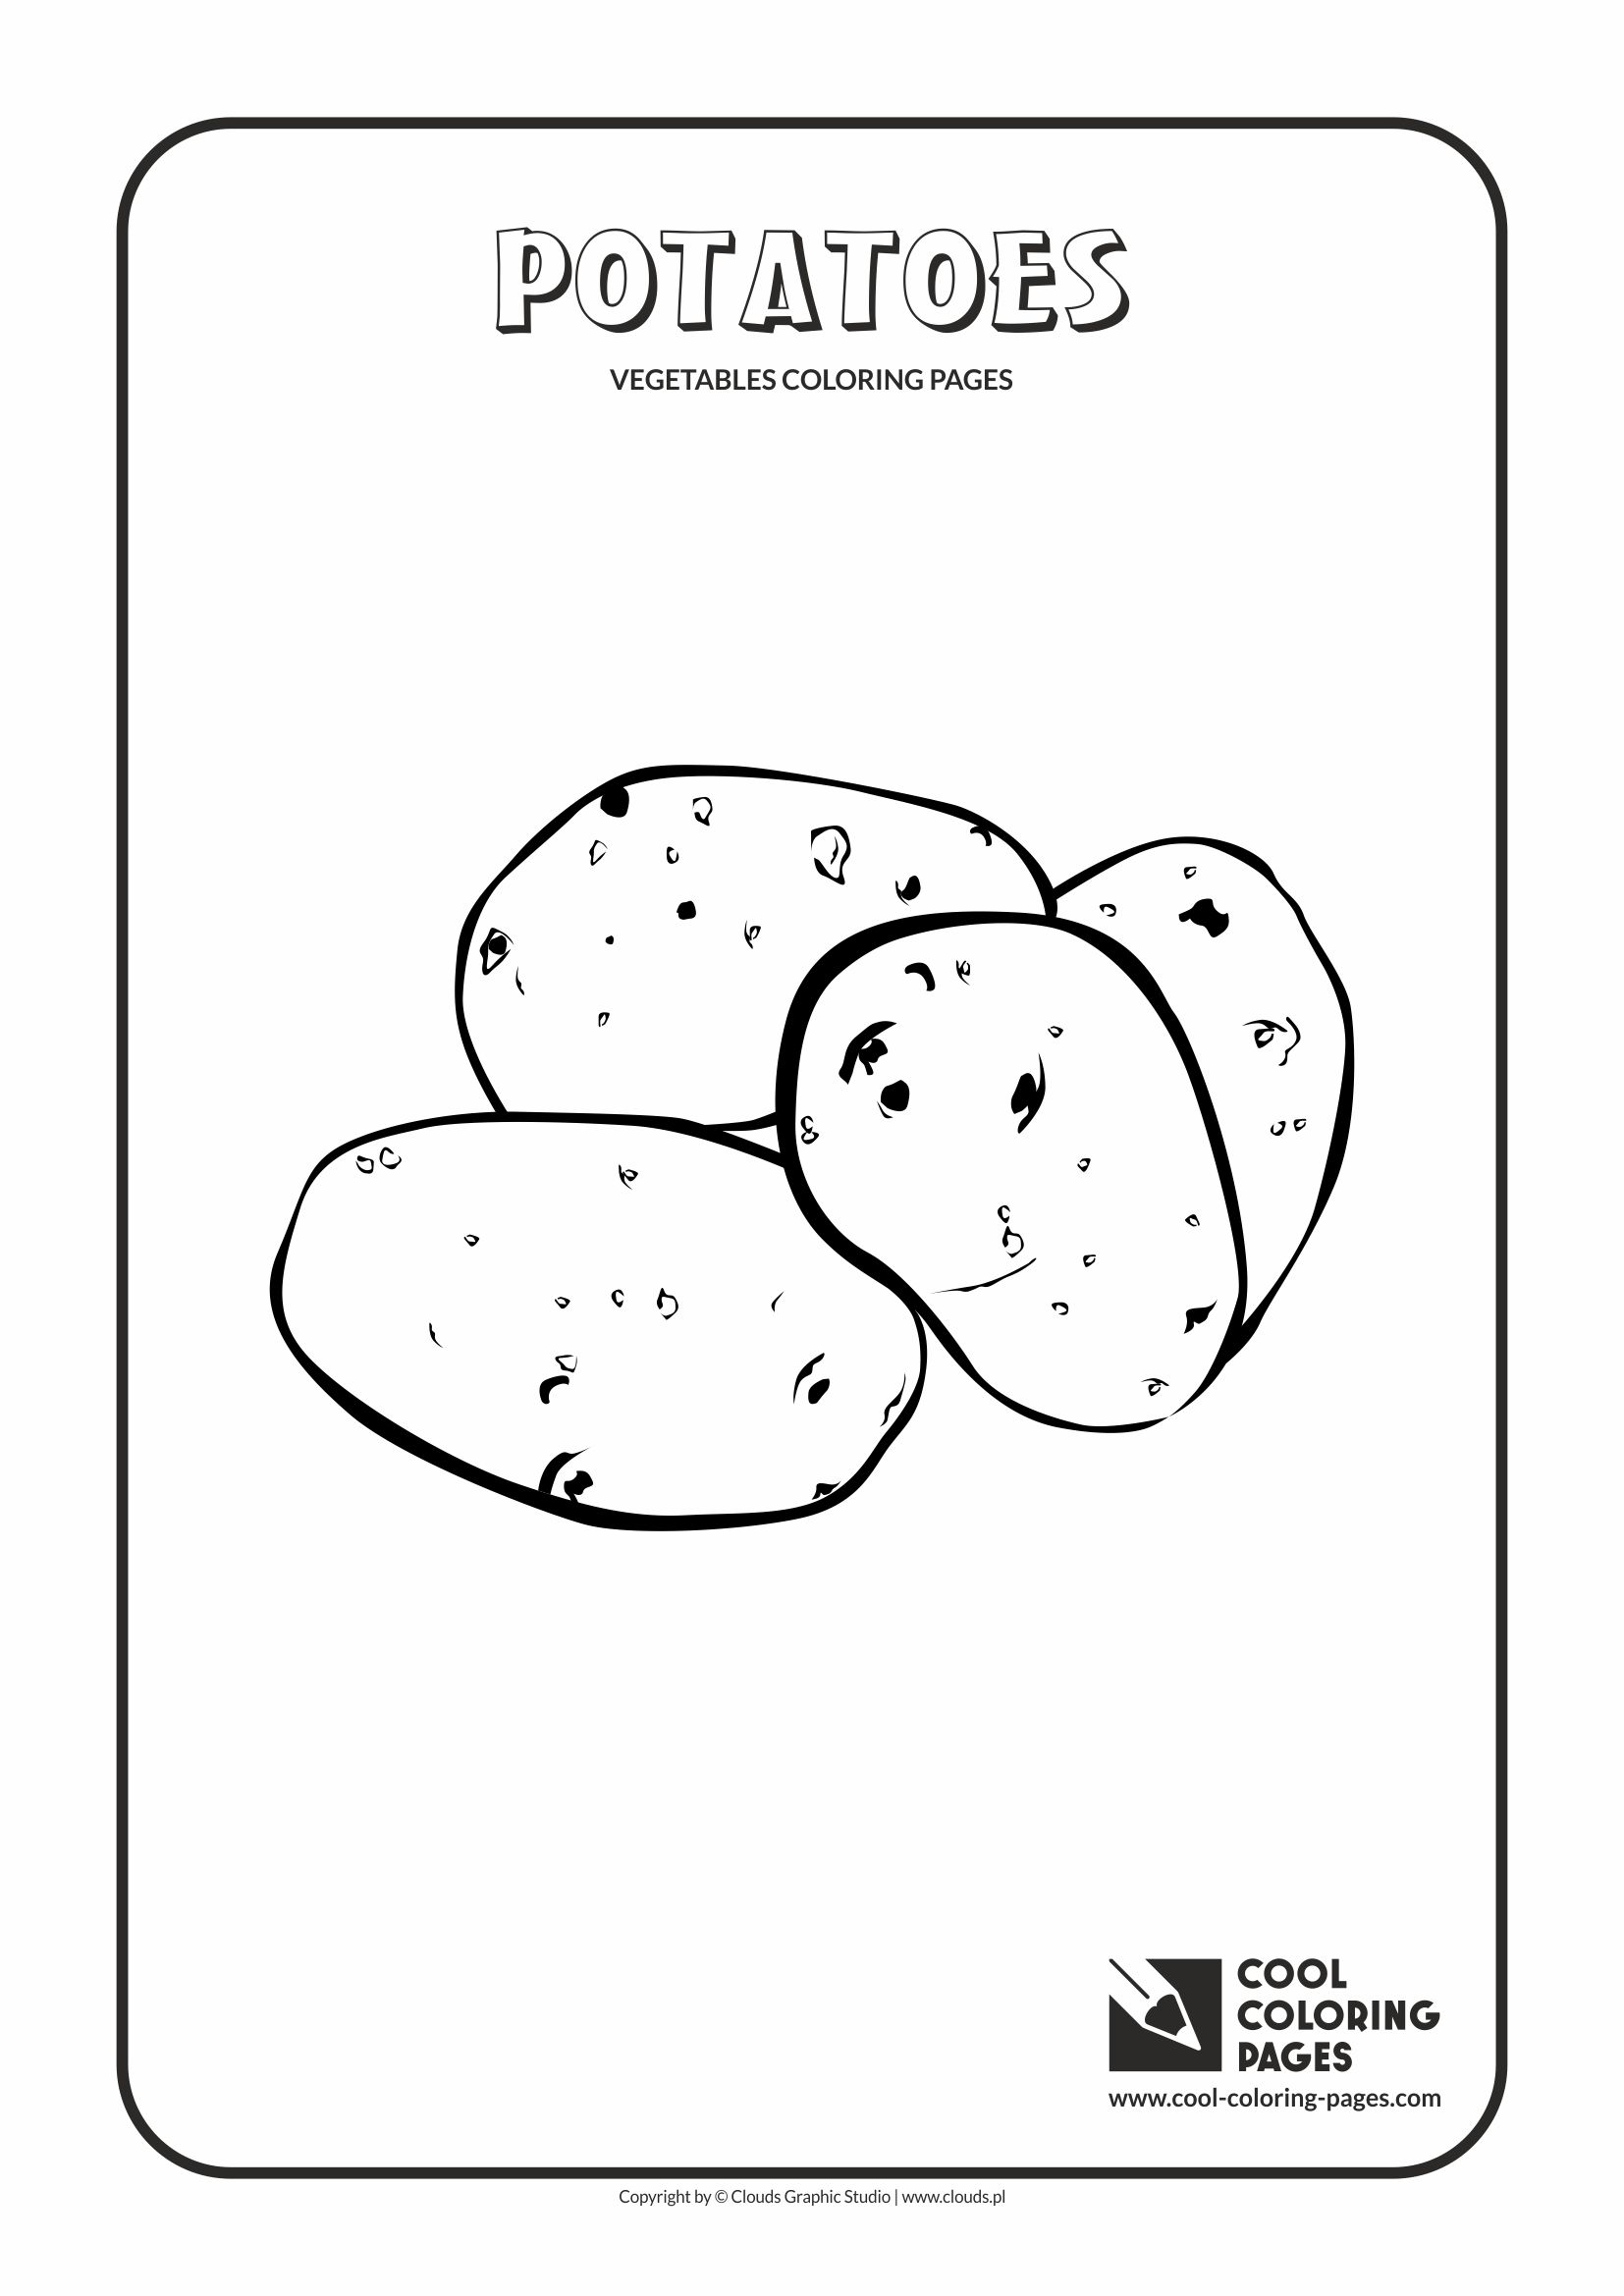 Download Cool Coloring Pages Vegetables coloring pages - Cool Coloring Pages | Free educational coloring ...